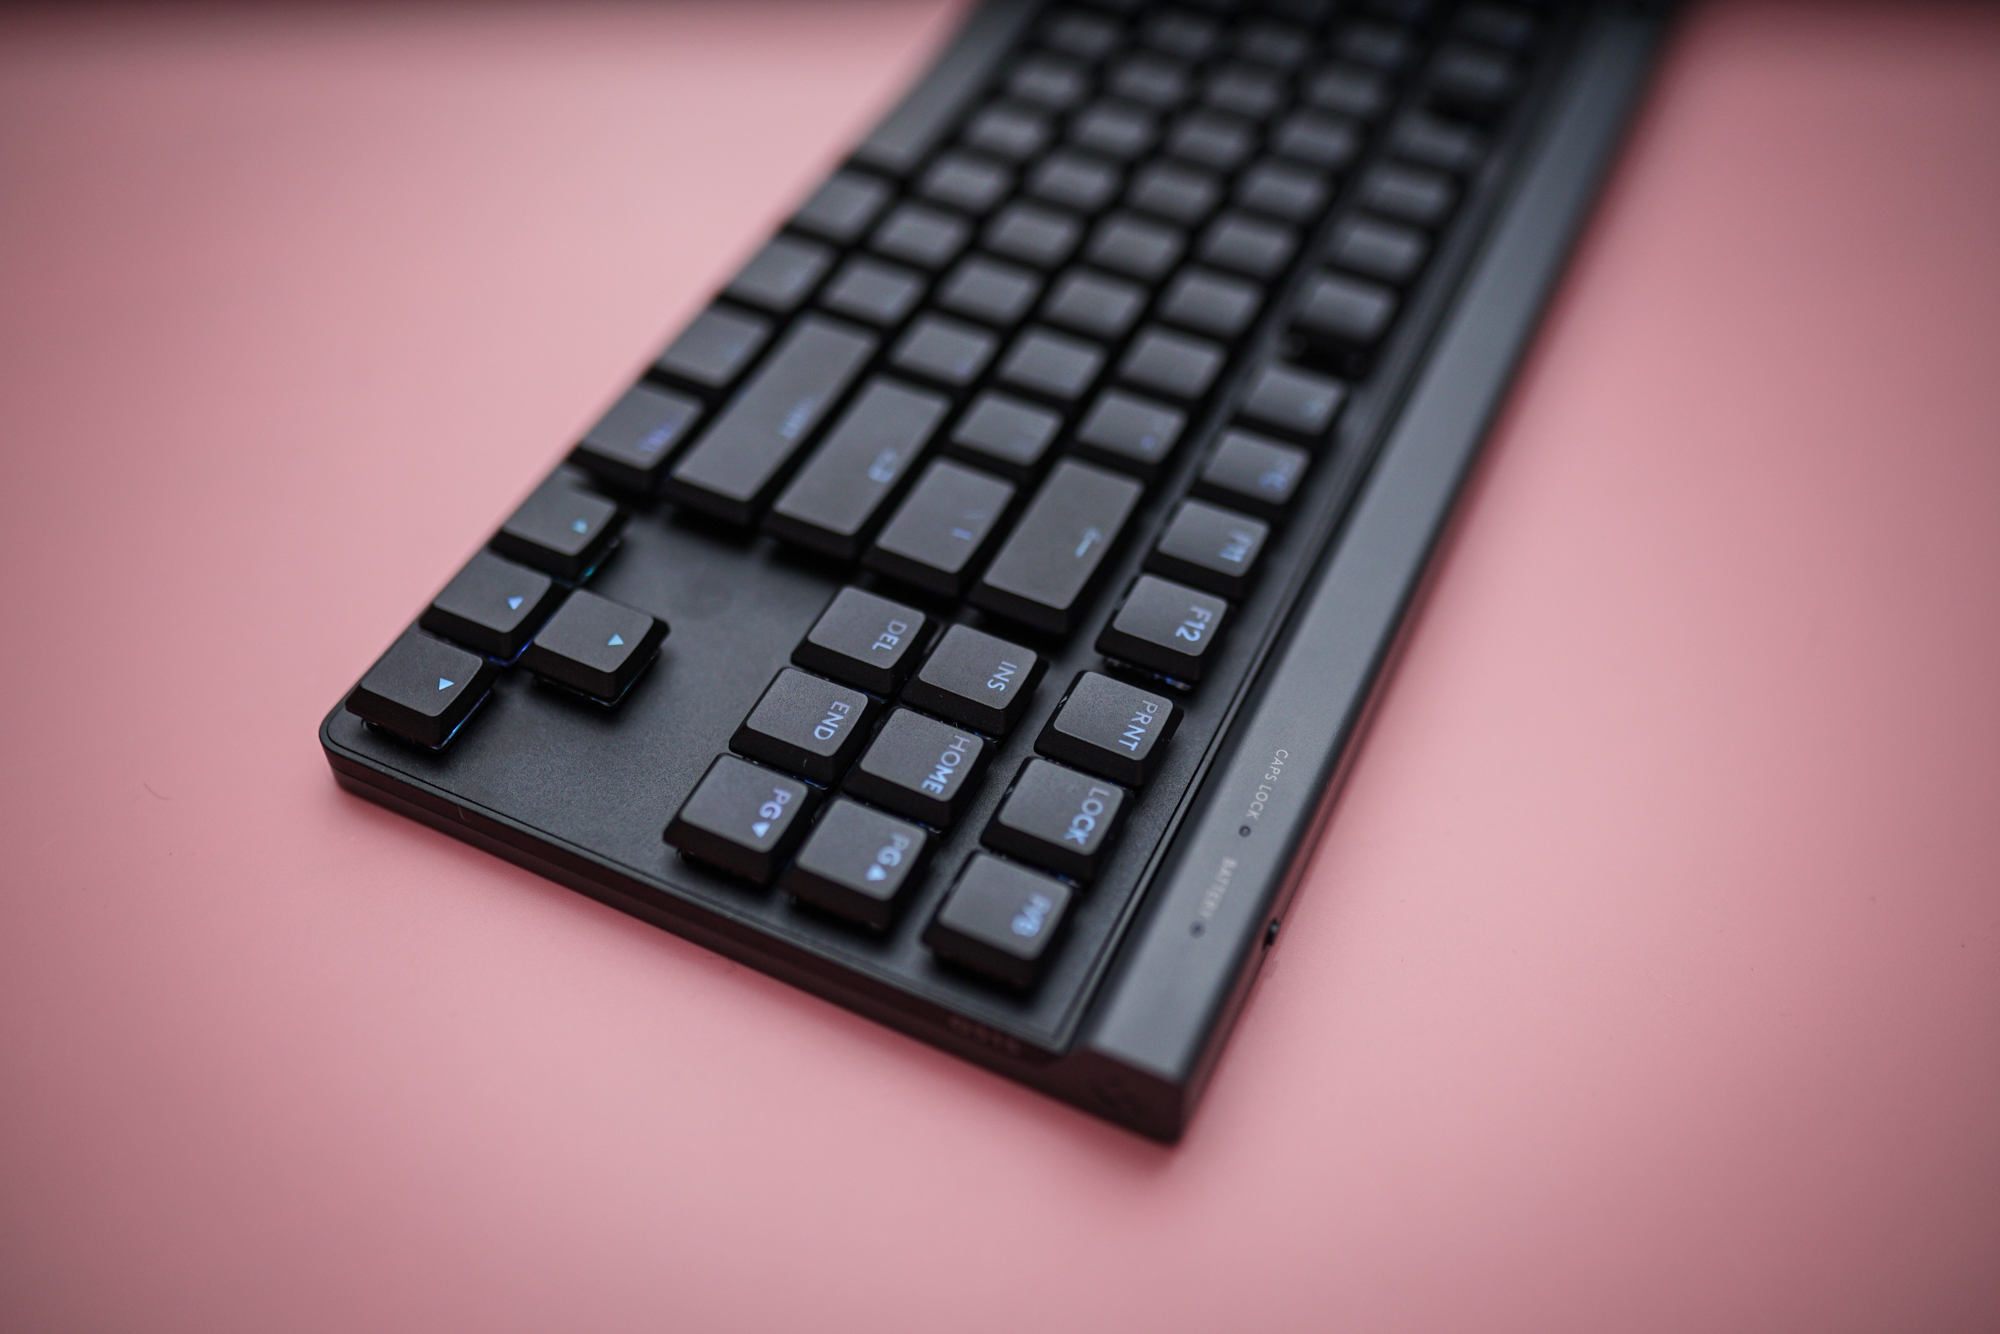 The Logitech G515 sitting on a pink background.